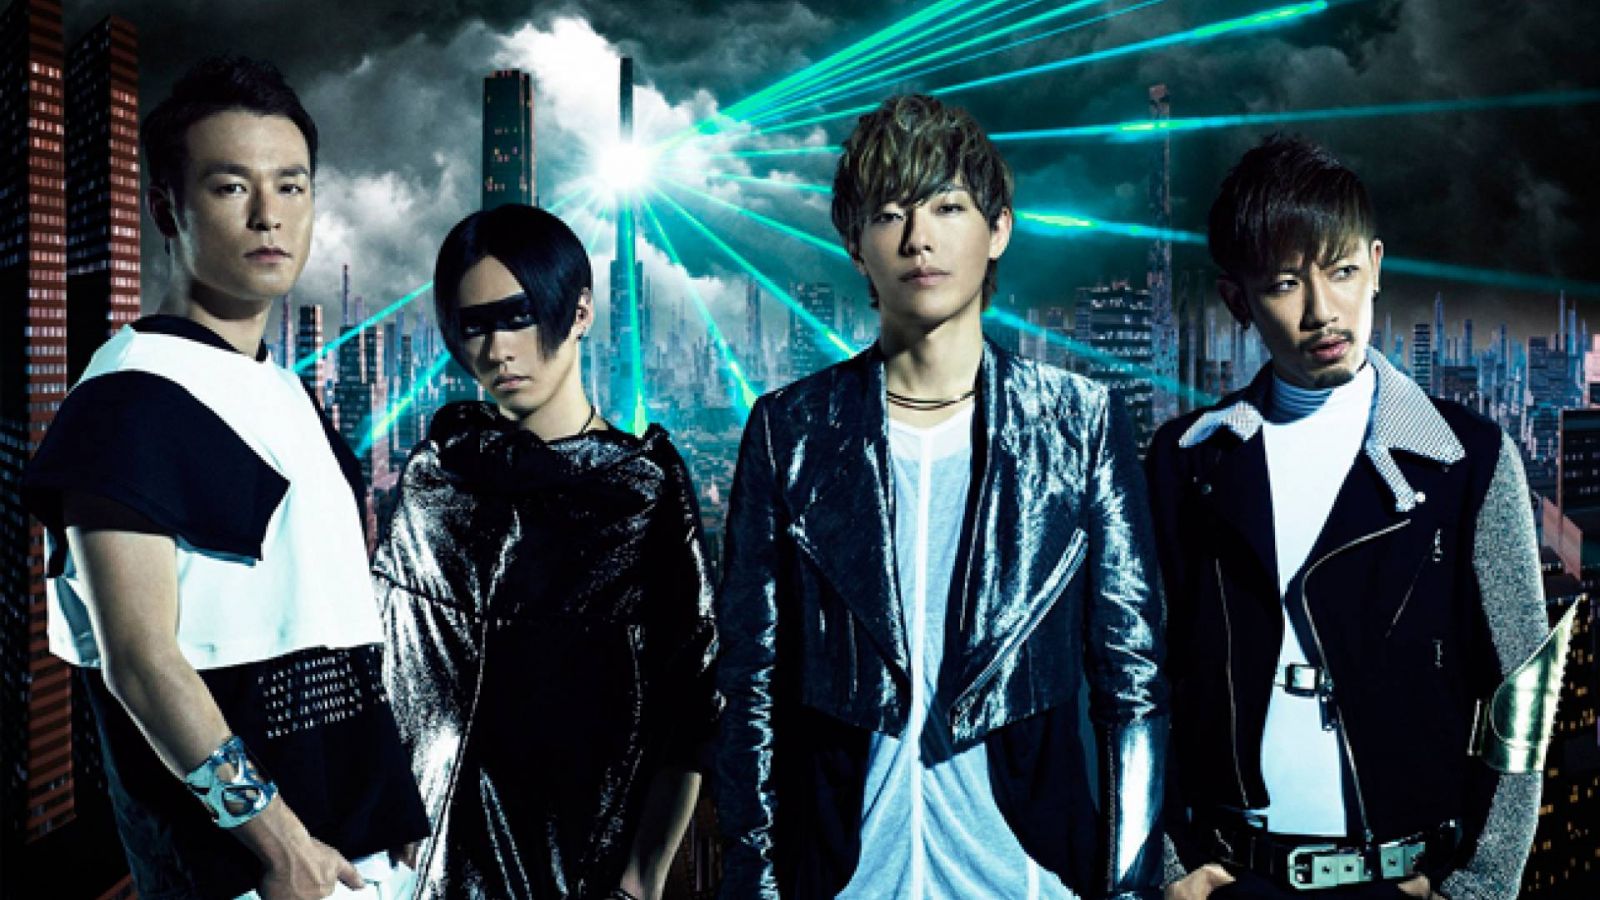 Nouveau single pour SPYAIR © 2015 Sony Music Associated Records All rights reserved.